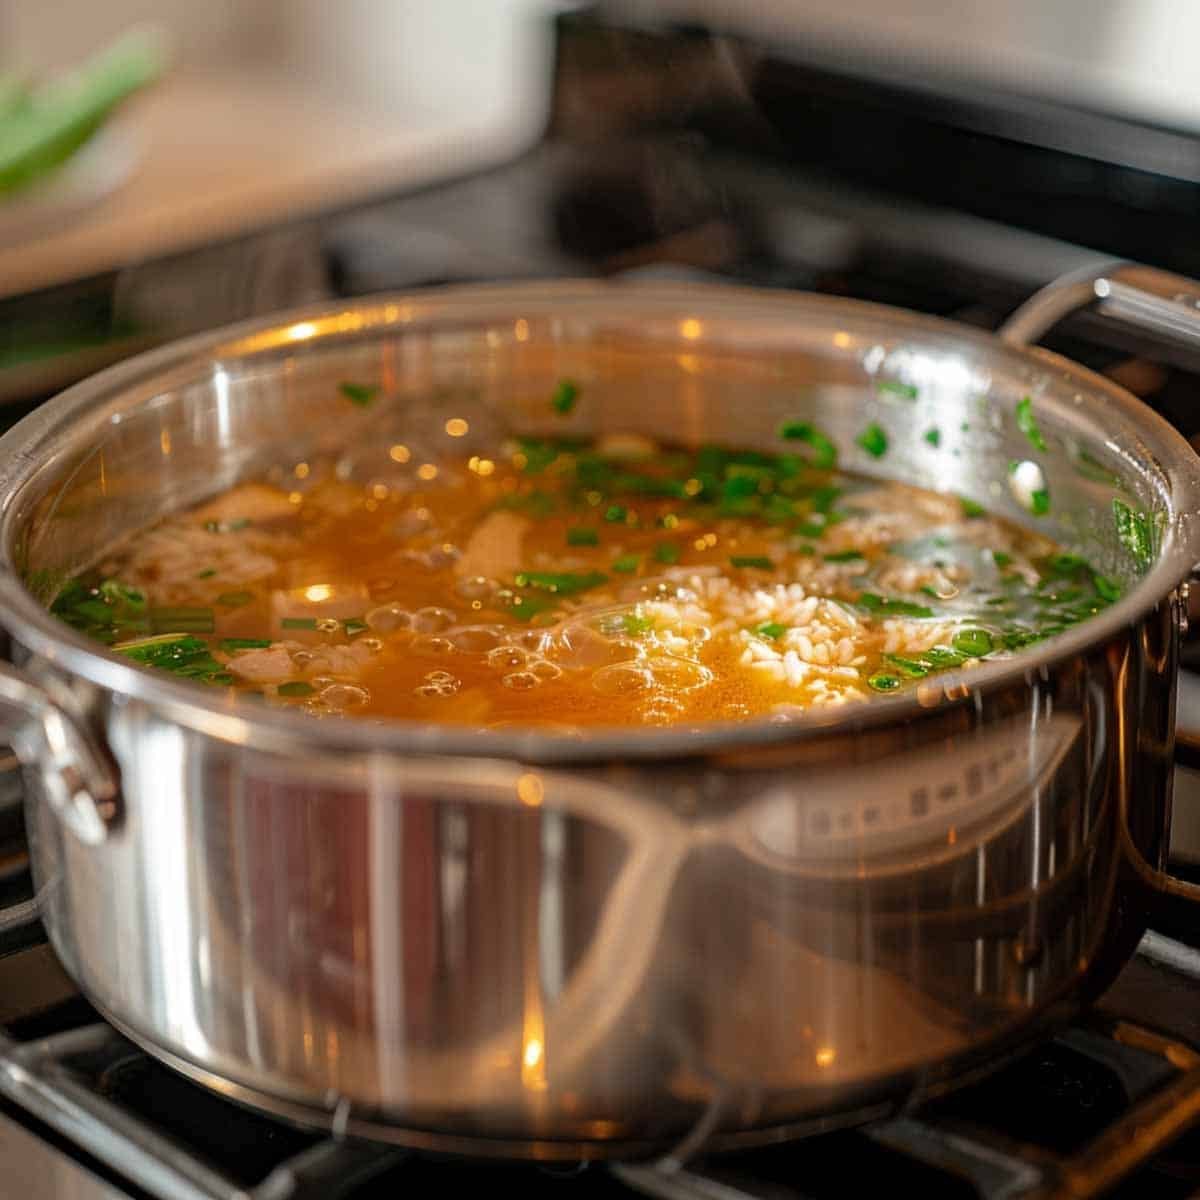 An image of a large pot of Thai Rice Soup (Khao Tom)boiling vigorously on a stove. The steam rises densely above the pot, indicating the intense heat. Bubbles can be seen breaking the surface of the liquid, which is filled with various ingredients contributing to a rich and hearty broth. This scene captures the dynamic process of soup cooking to perfection.